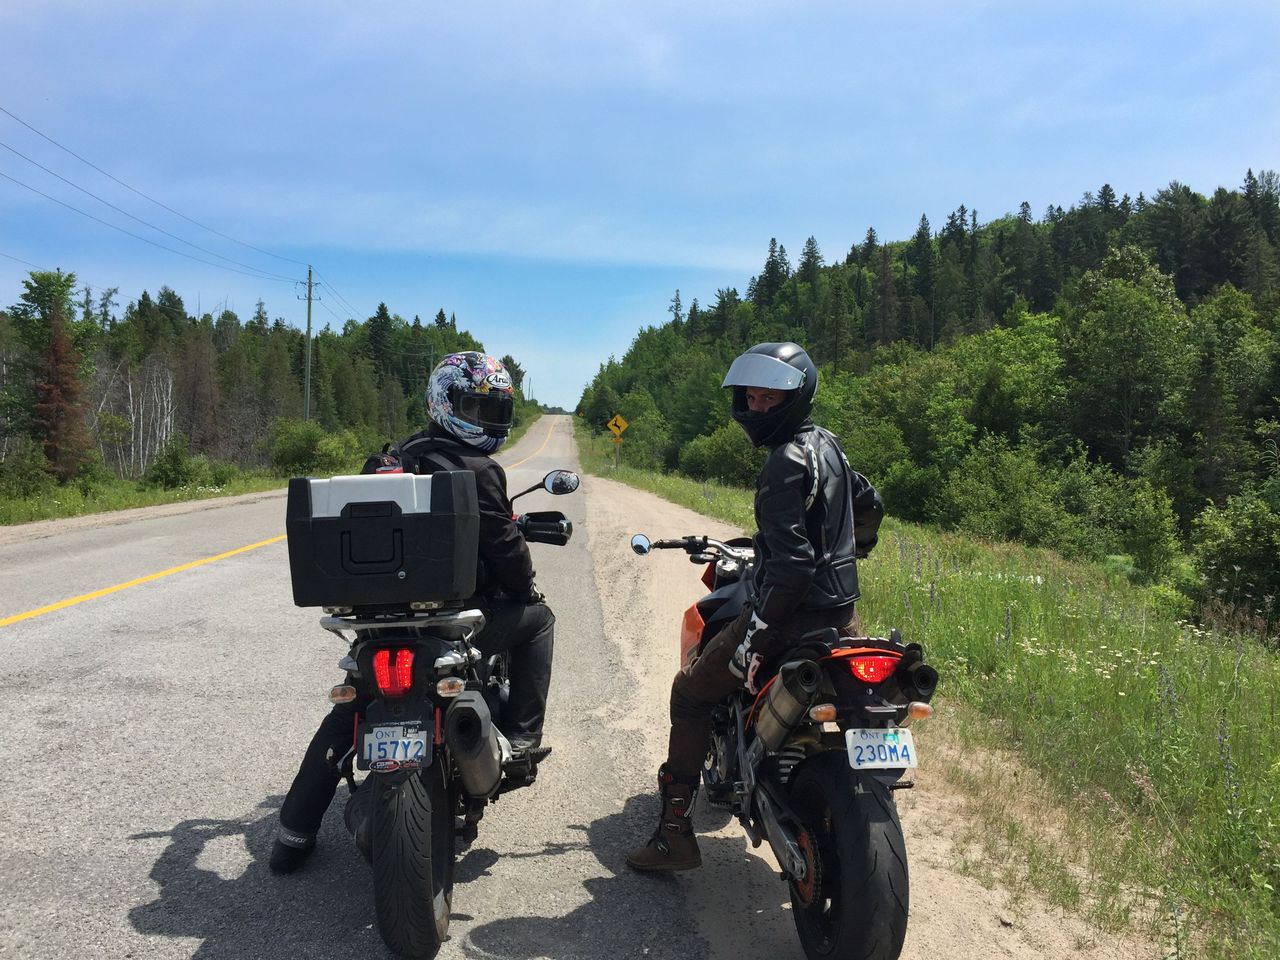 Coming off a twisty road in Northern Ontario